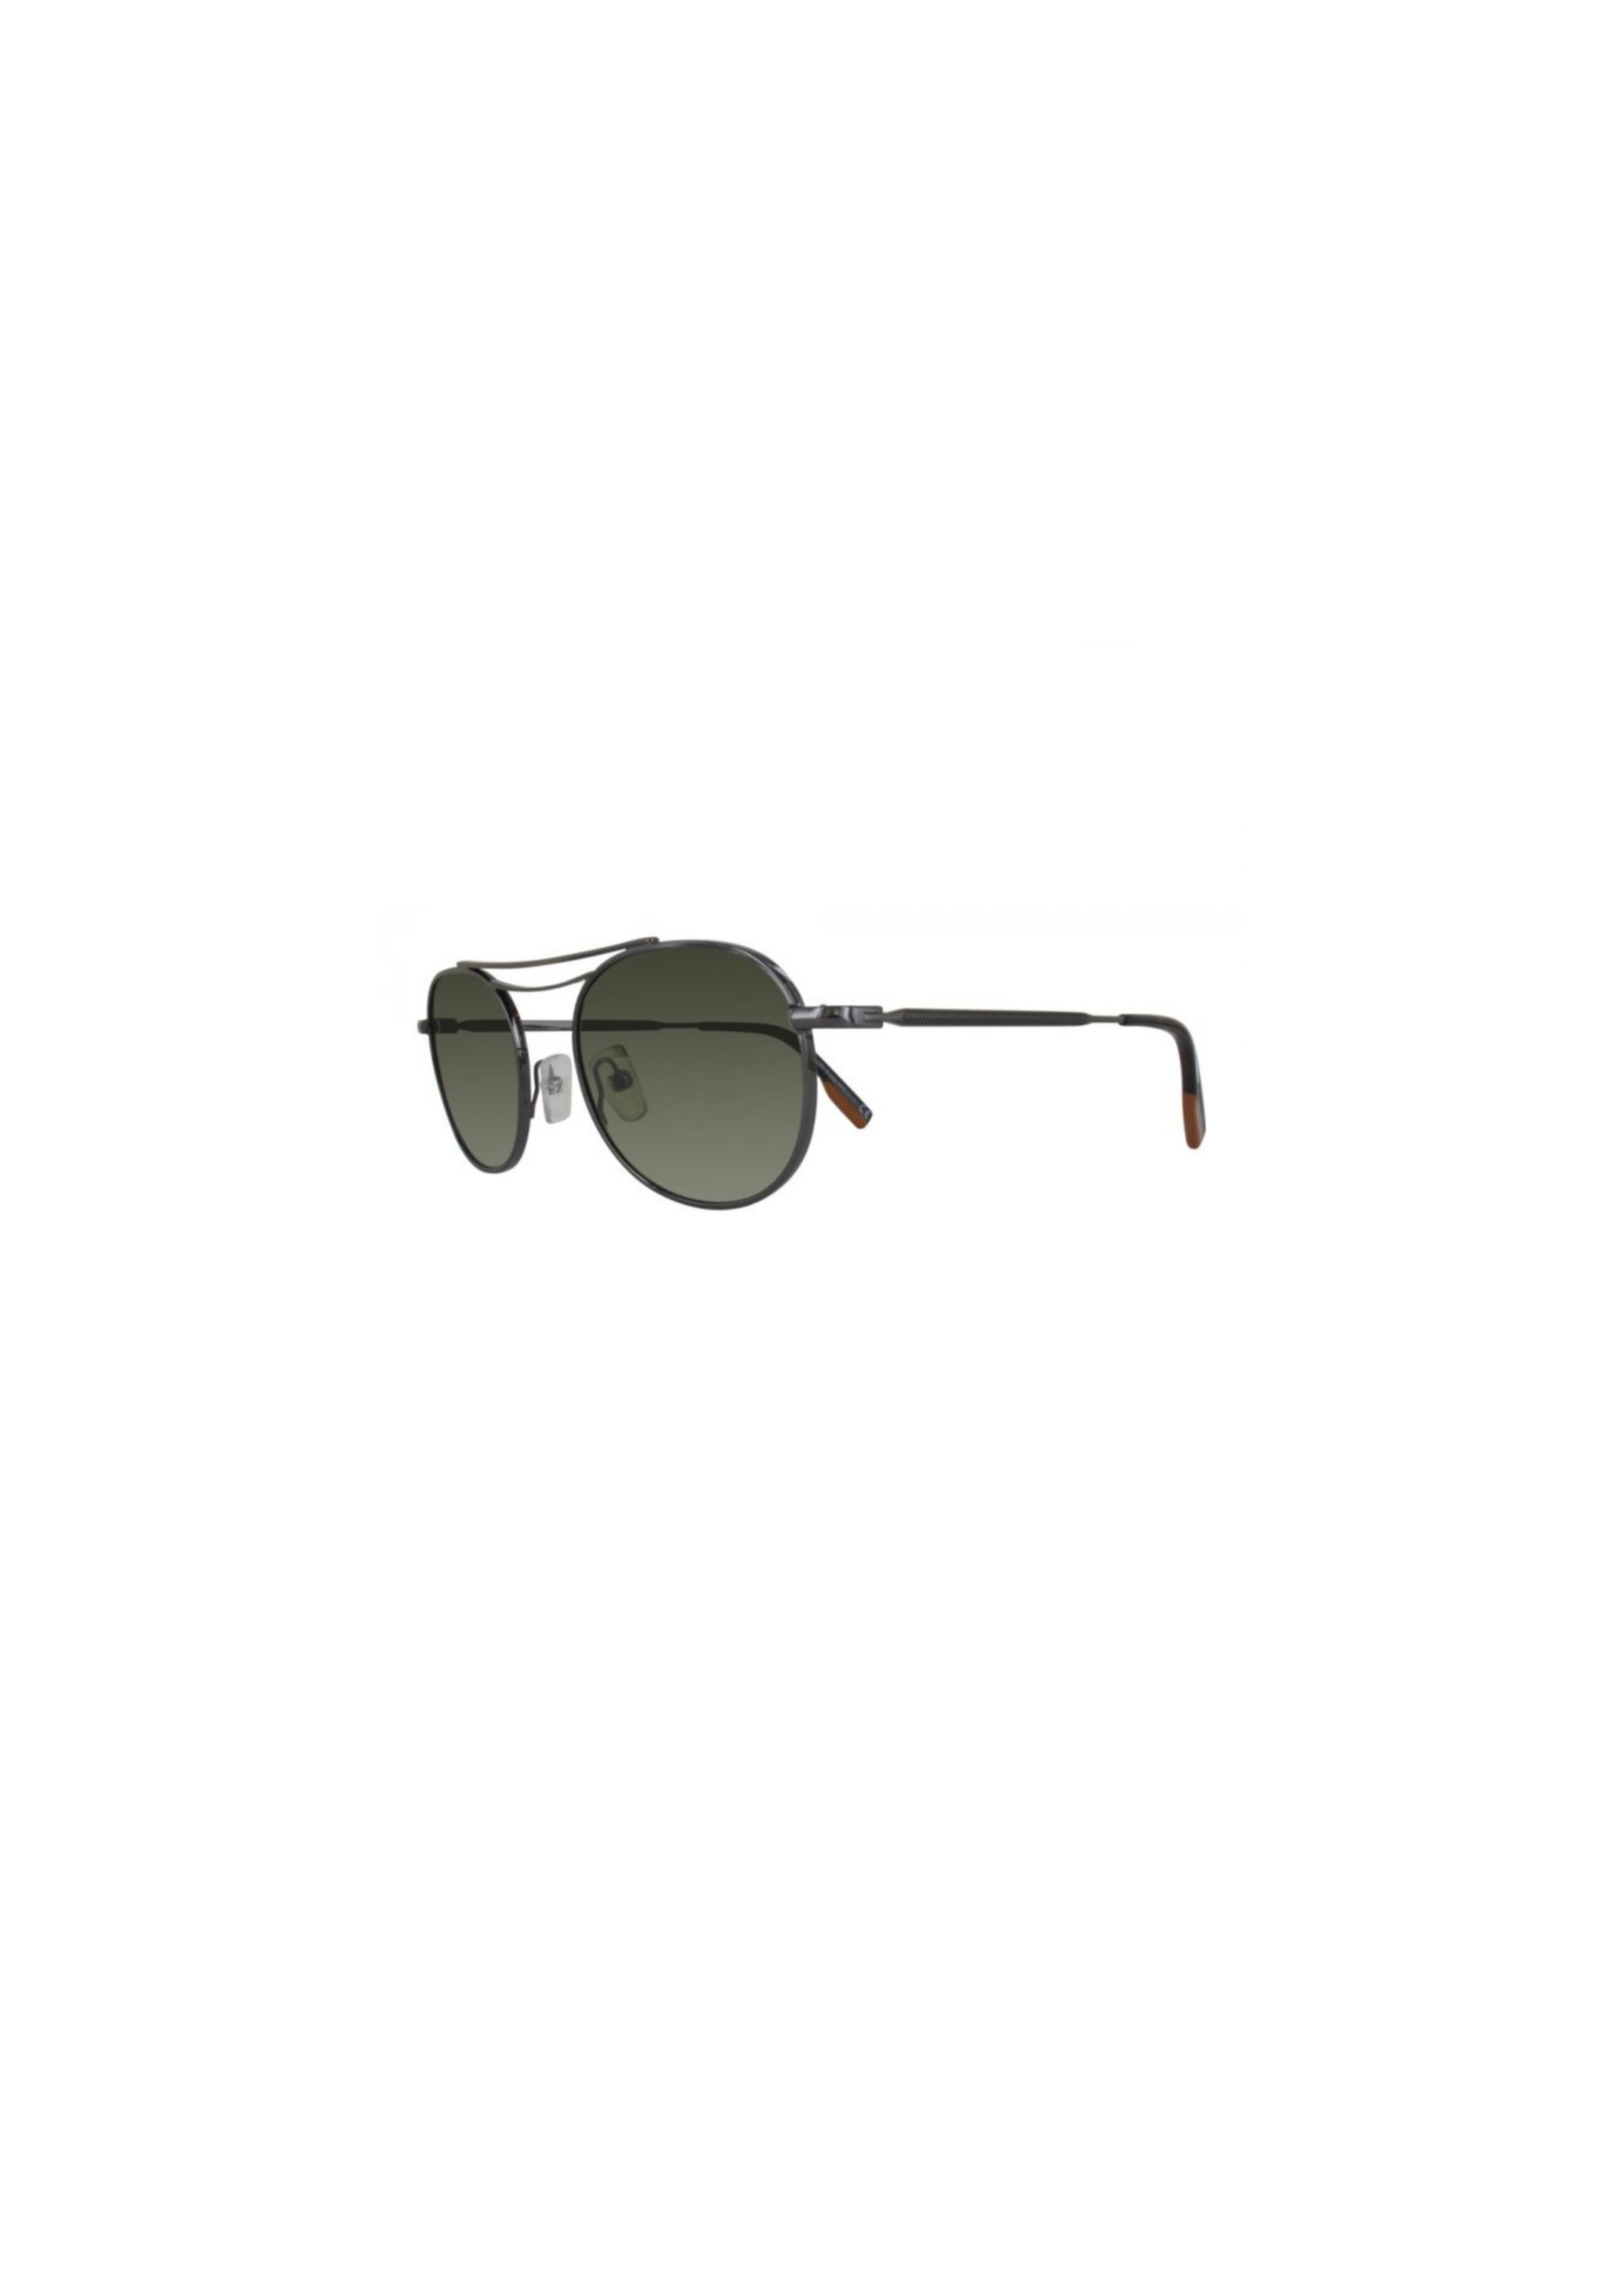 The Ermenegildo Zegna eyewear collection features a refined and classic take that everyone can enjoy.  The EZ0104 sunglasses feature excellent design making them suitable for any occasion. The Metal frames are light, durable, hypoallergenic and sleek.  The non-slip temples and integrated nose pads will prevent wobble while the optical hinges will provide a secure and comfortable fit. The Plastic lenses of Ermenegildo Zegna sunglasses are strong and can provide the ideal protection against UV rays.